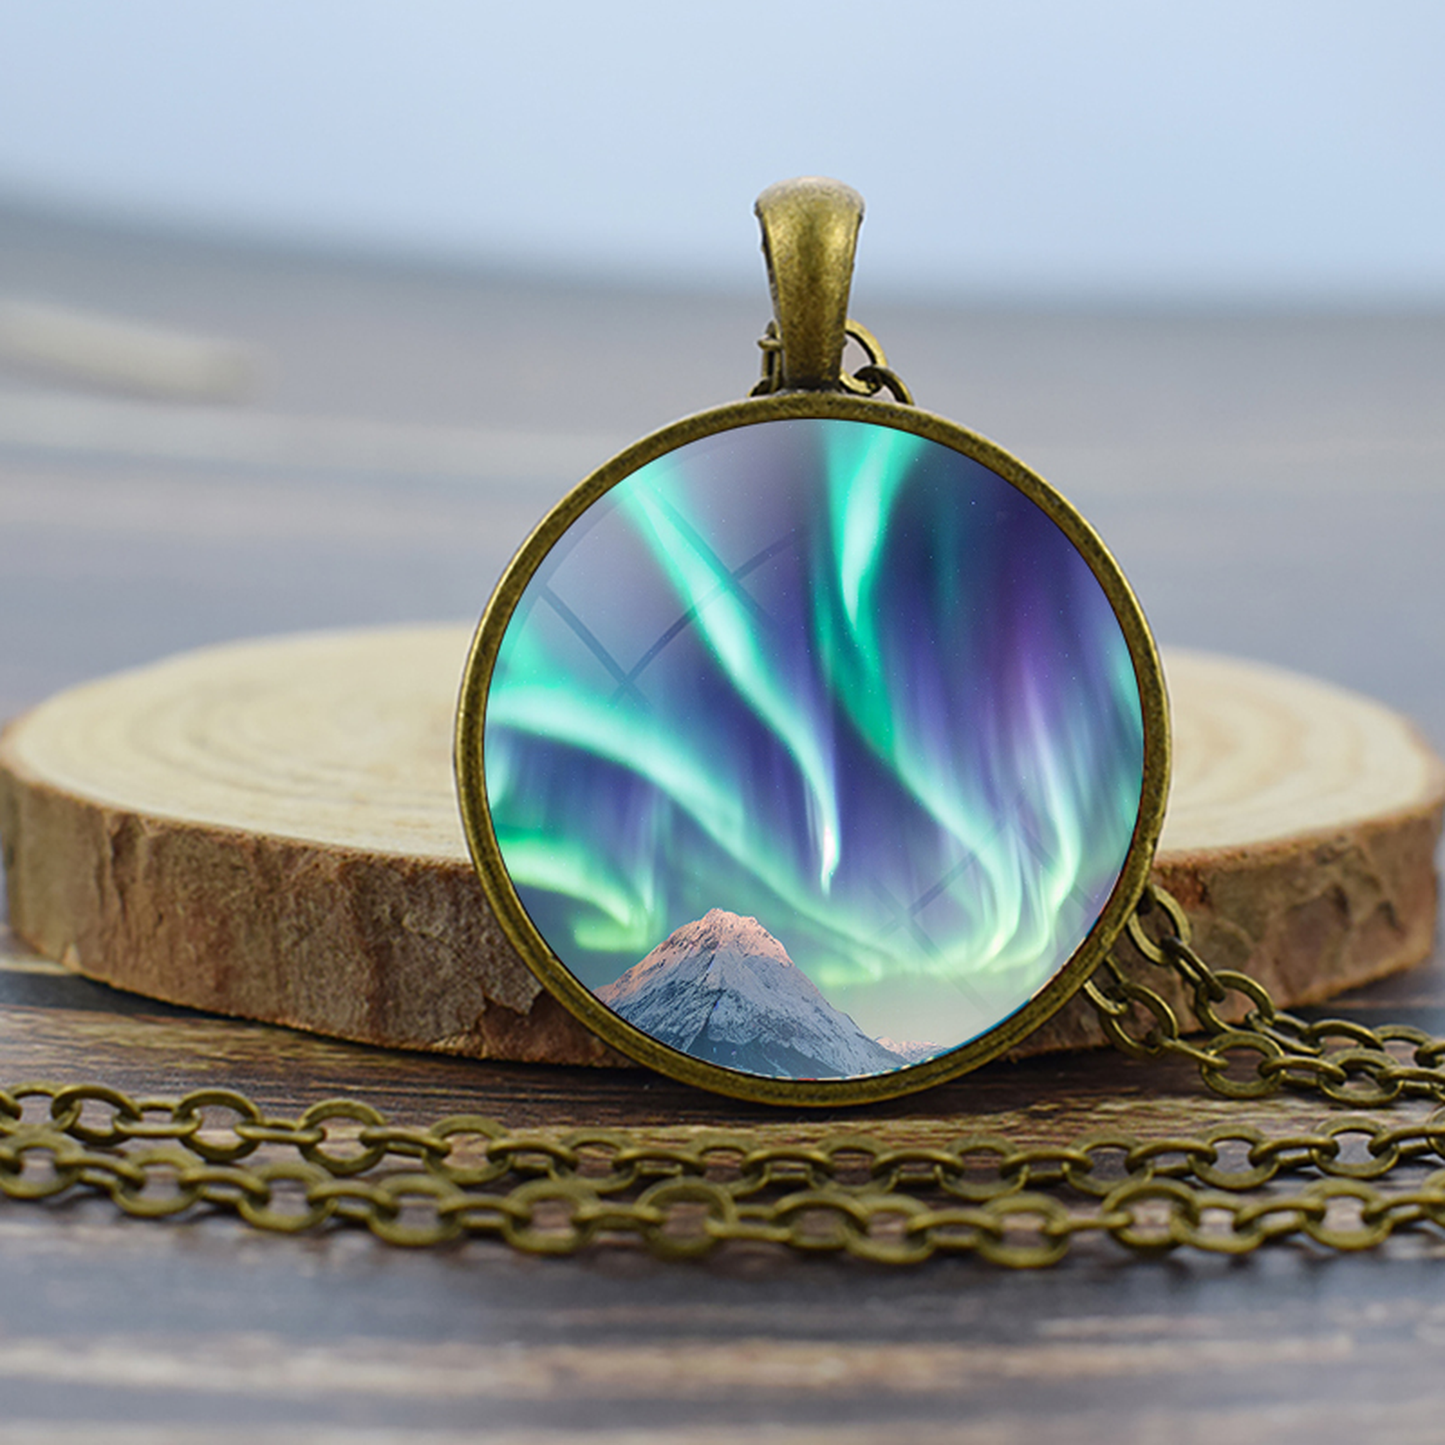 Unique Aurora Borealis Bronze Necklace - Northern Light Jewelry - Glass Dome Pendent Necklace - Perfect Aurora Lovers Gift 1